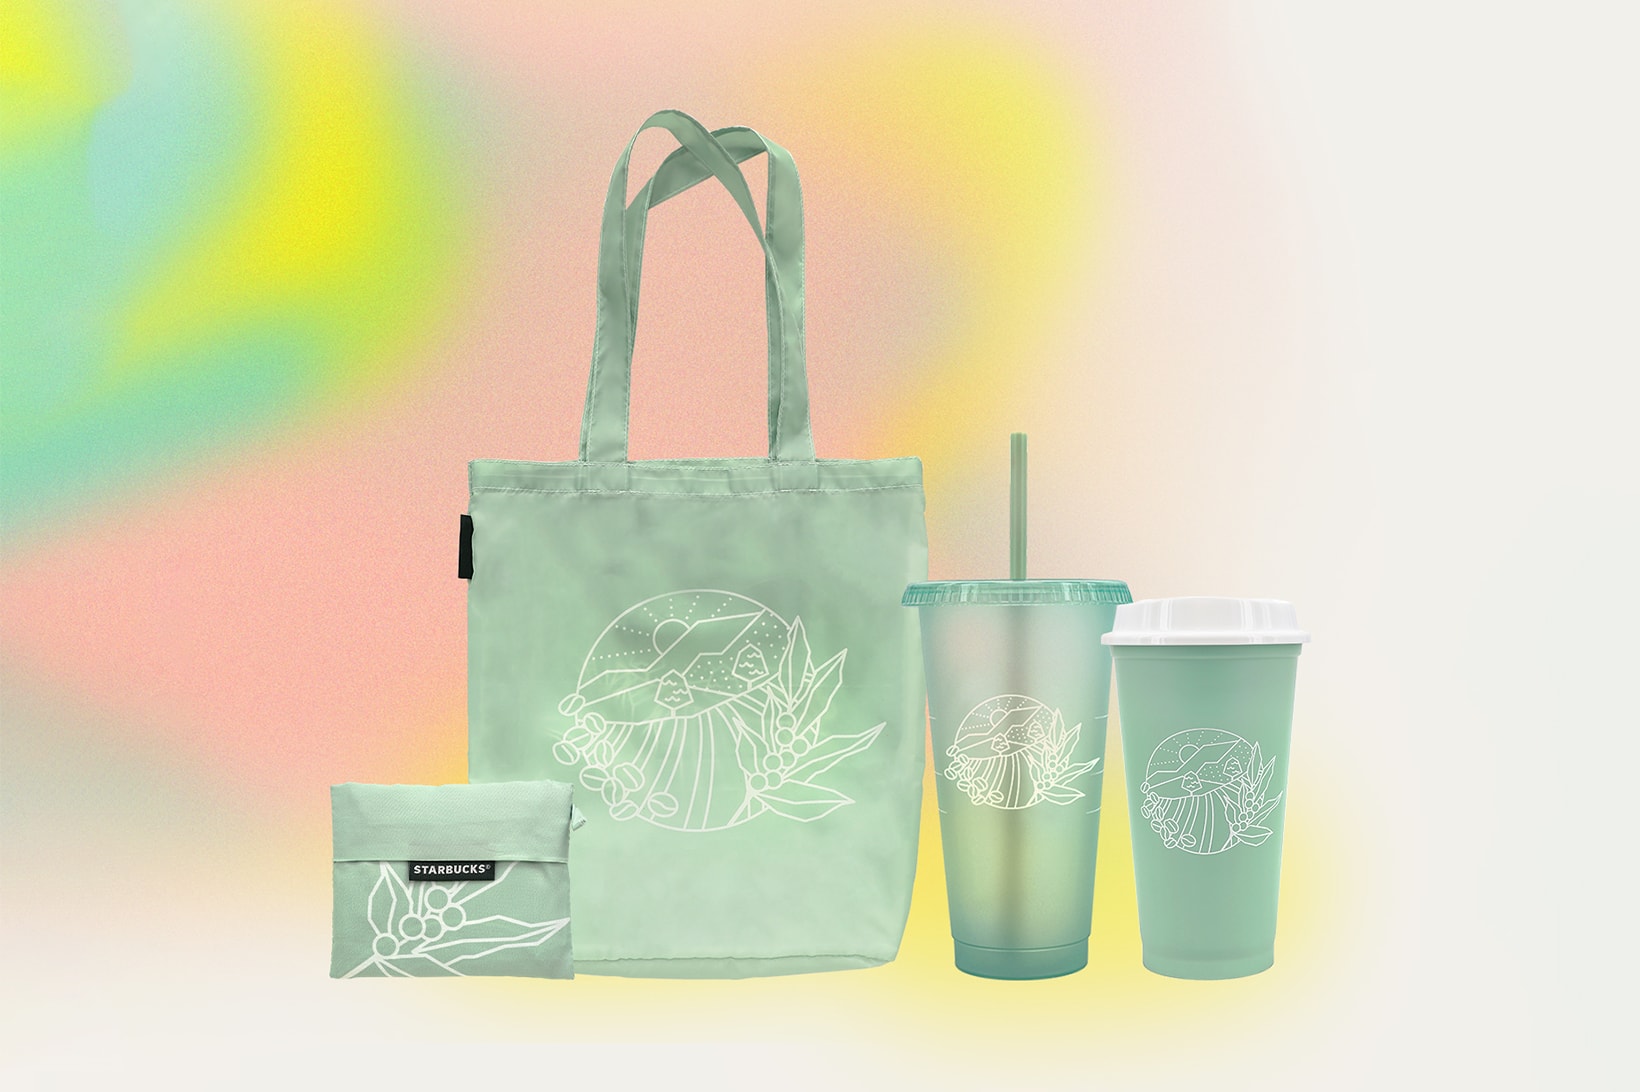 https://image-cdn.hypb.st/https%3A%2F%2Fhypebeast.com%2Fwp-content%2Fblogs.dir%2F6%2Ffiles%2F2021%2F04%2Fstarbucks-earth-month-merchandise-tumblers-glass-water-bottle-cup-sustainable-reusable-tote-bag-release-2.jpg?cbr=1&q=90